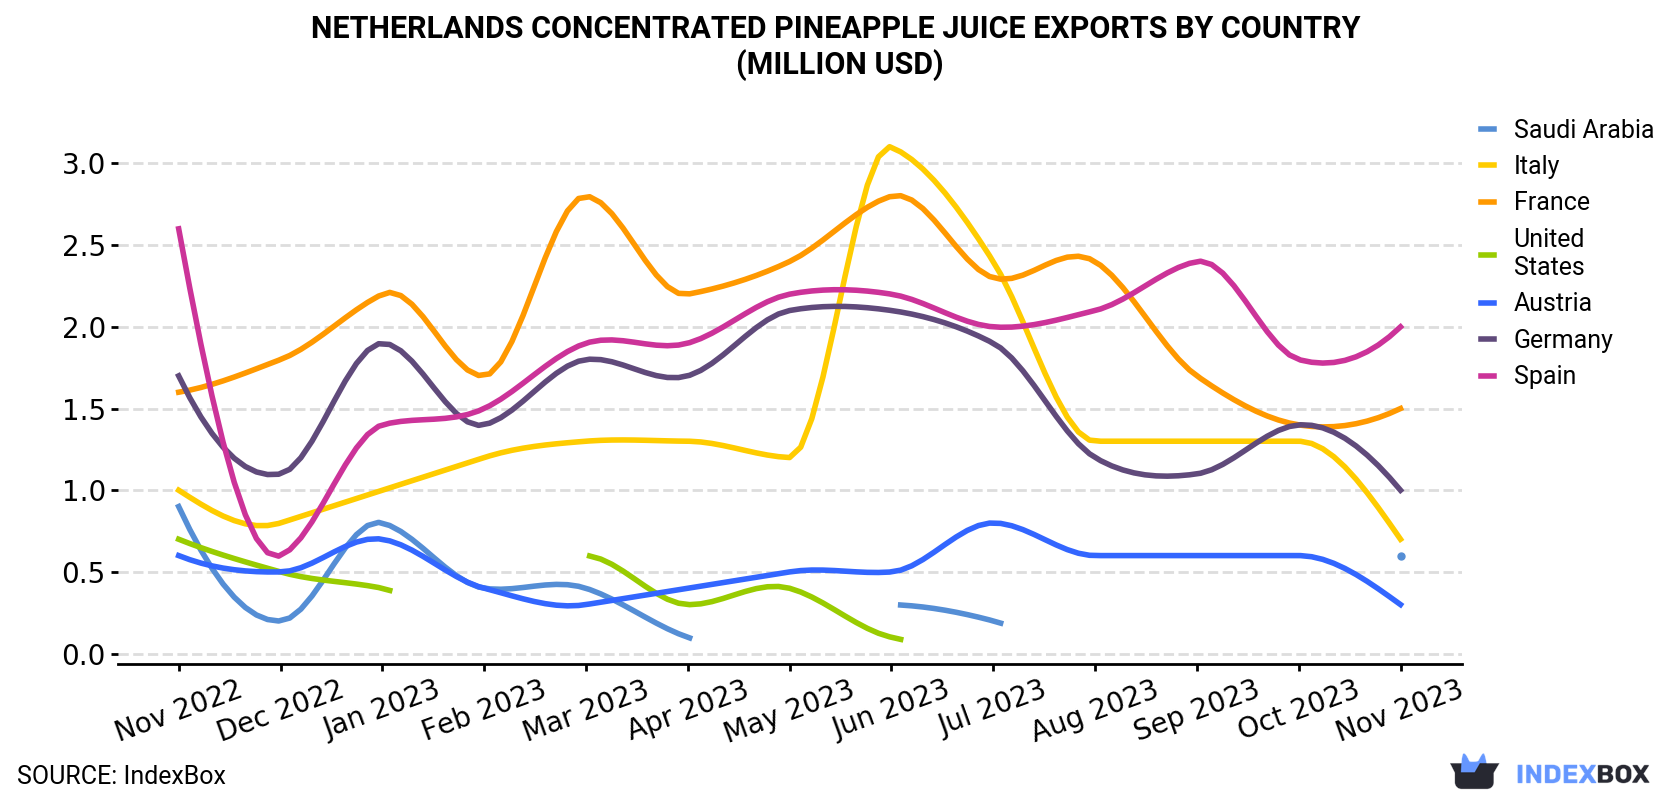 Netherlands Concentrated Pineapple Juice Exports By Country (Million USD)